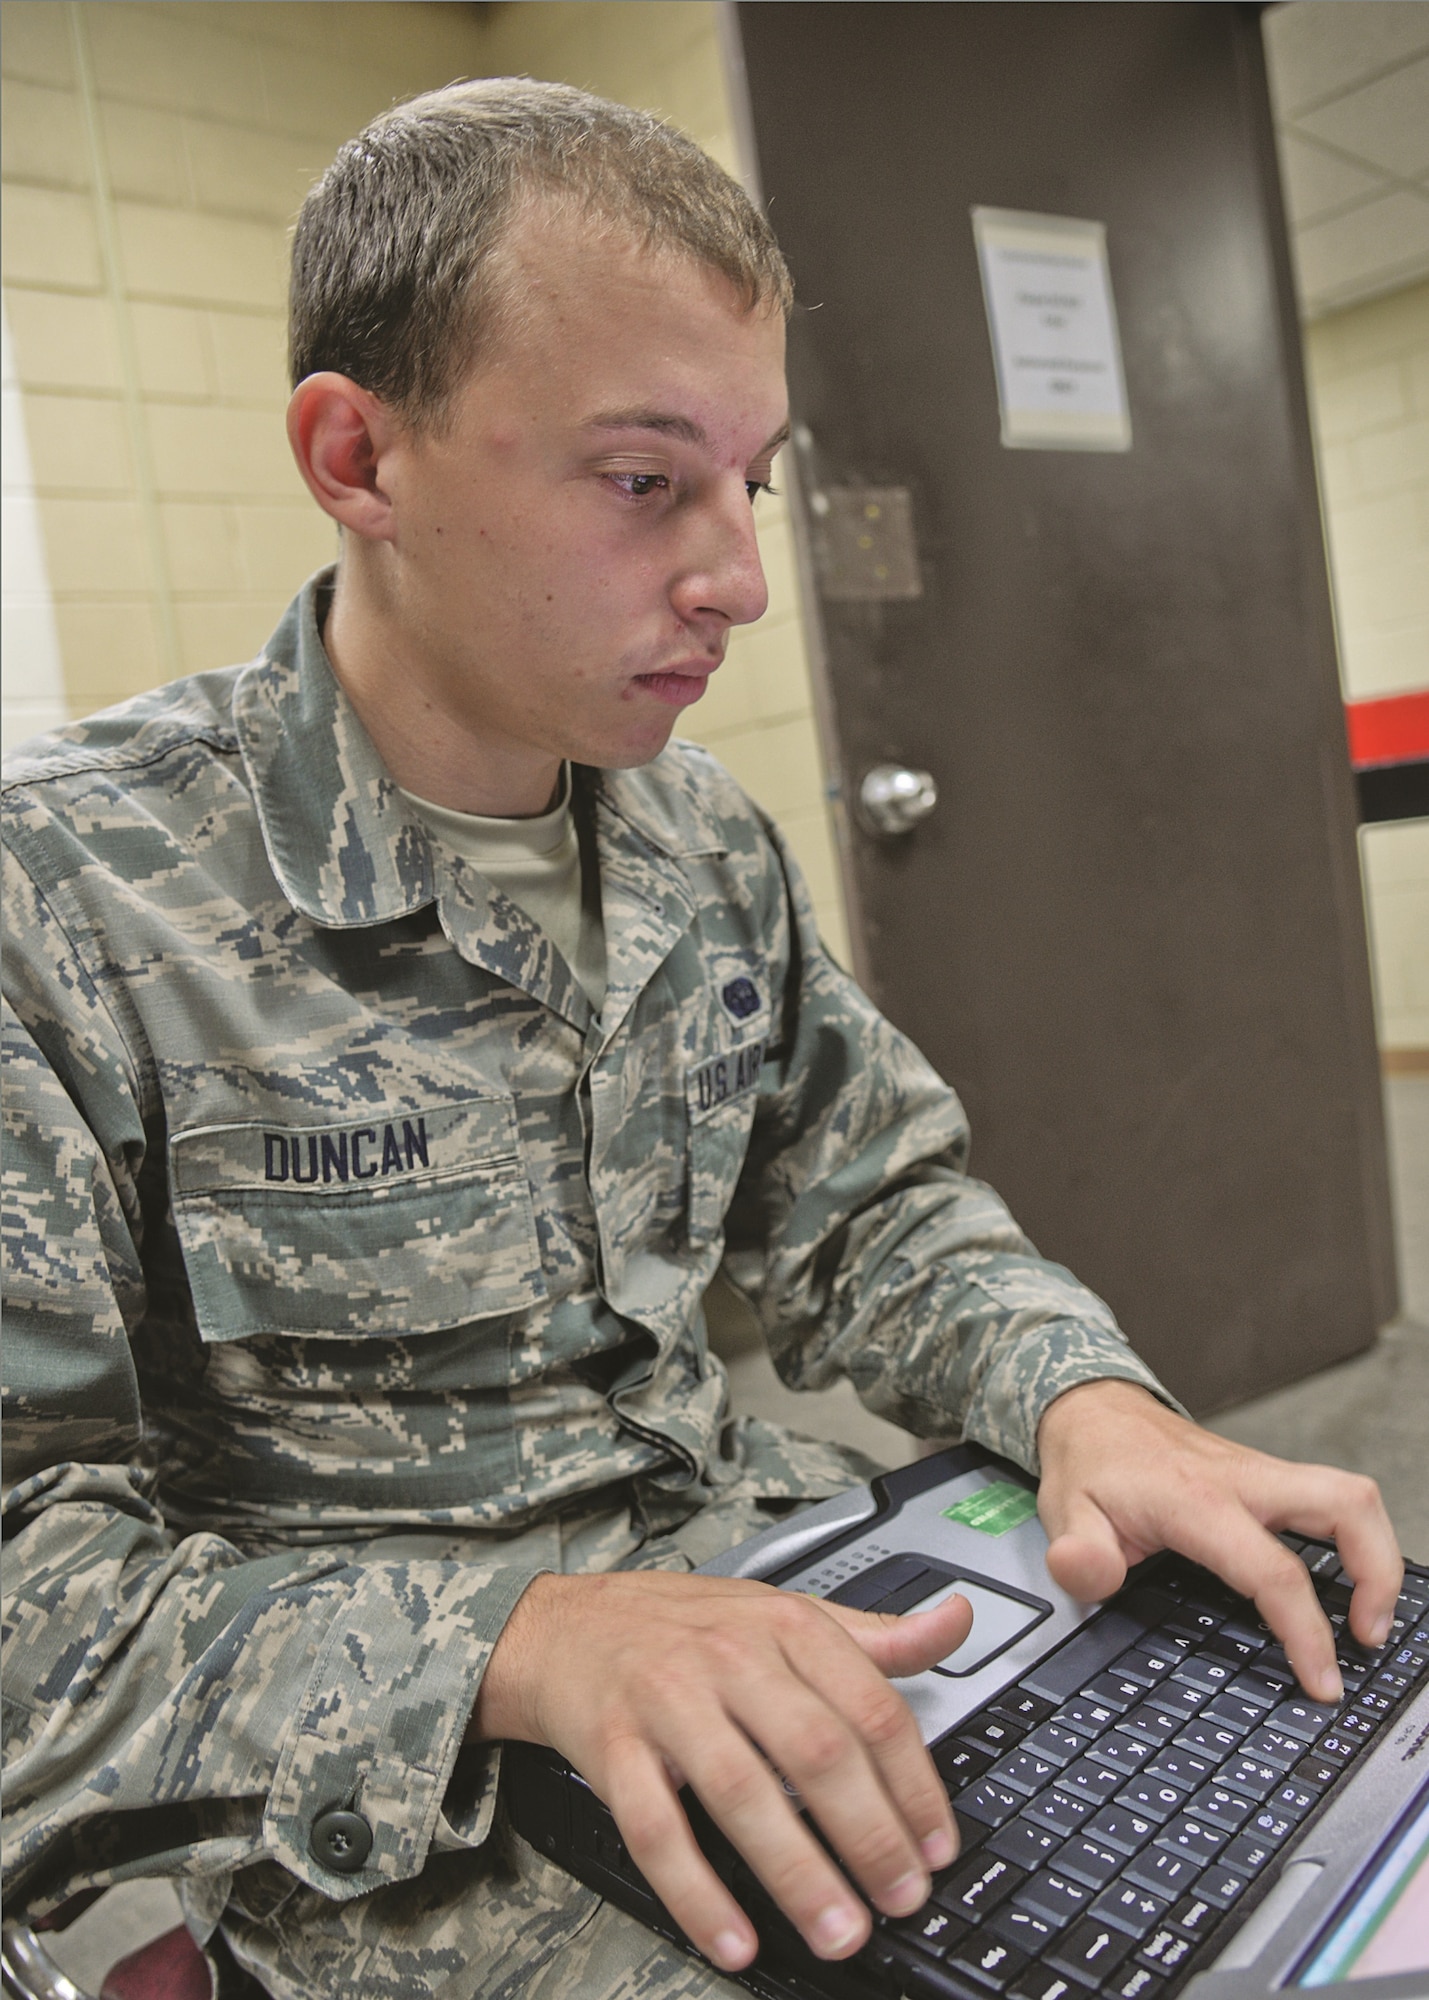 Airman 1st Class Lucas Duncan, 644th Combat Communications Squadron radio frequency transmissions apprentice, uses a laptop to monitor and control updates to wireless Air Force communications assets Aug 27, 2015 on Suwon Air Base, Republic of Korea. The 15-Airman team from the 644th CBCS is in place at Suwon AB from Andersen Air Force Base, Guam, to help set up and maintain temporary communications to connect approximately 200 devices and 700 displaced Osan Air Base Airmen. (U.S. Air Force photo/Tech. Sgt. Travis Edwards)